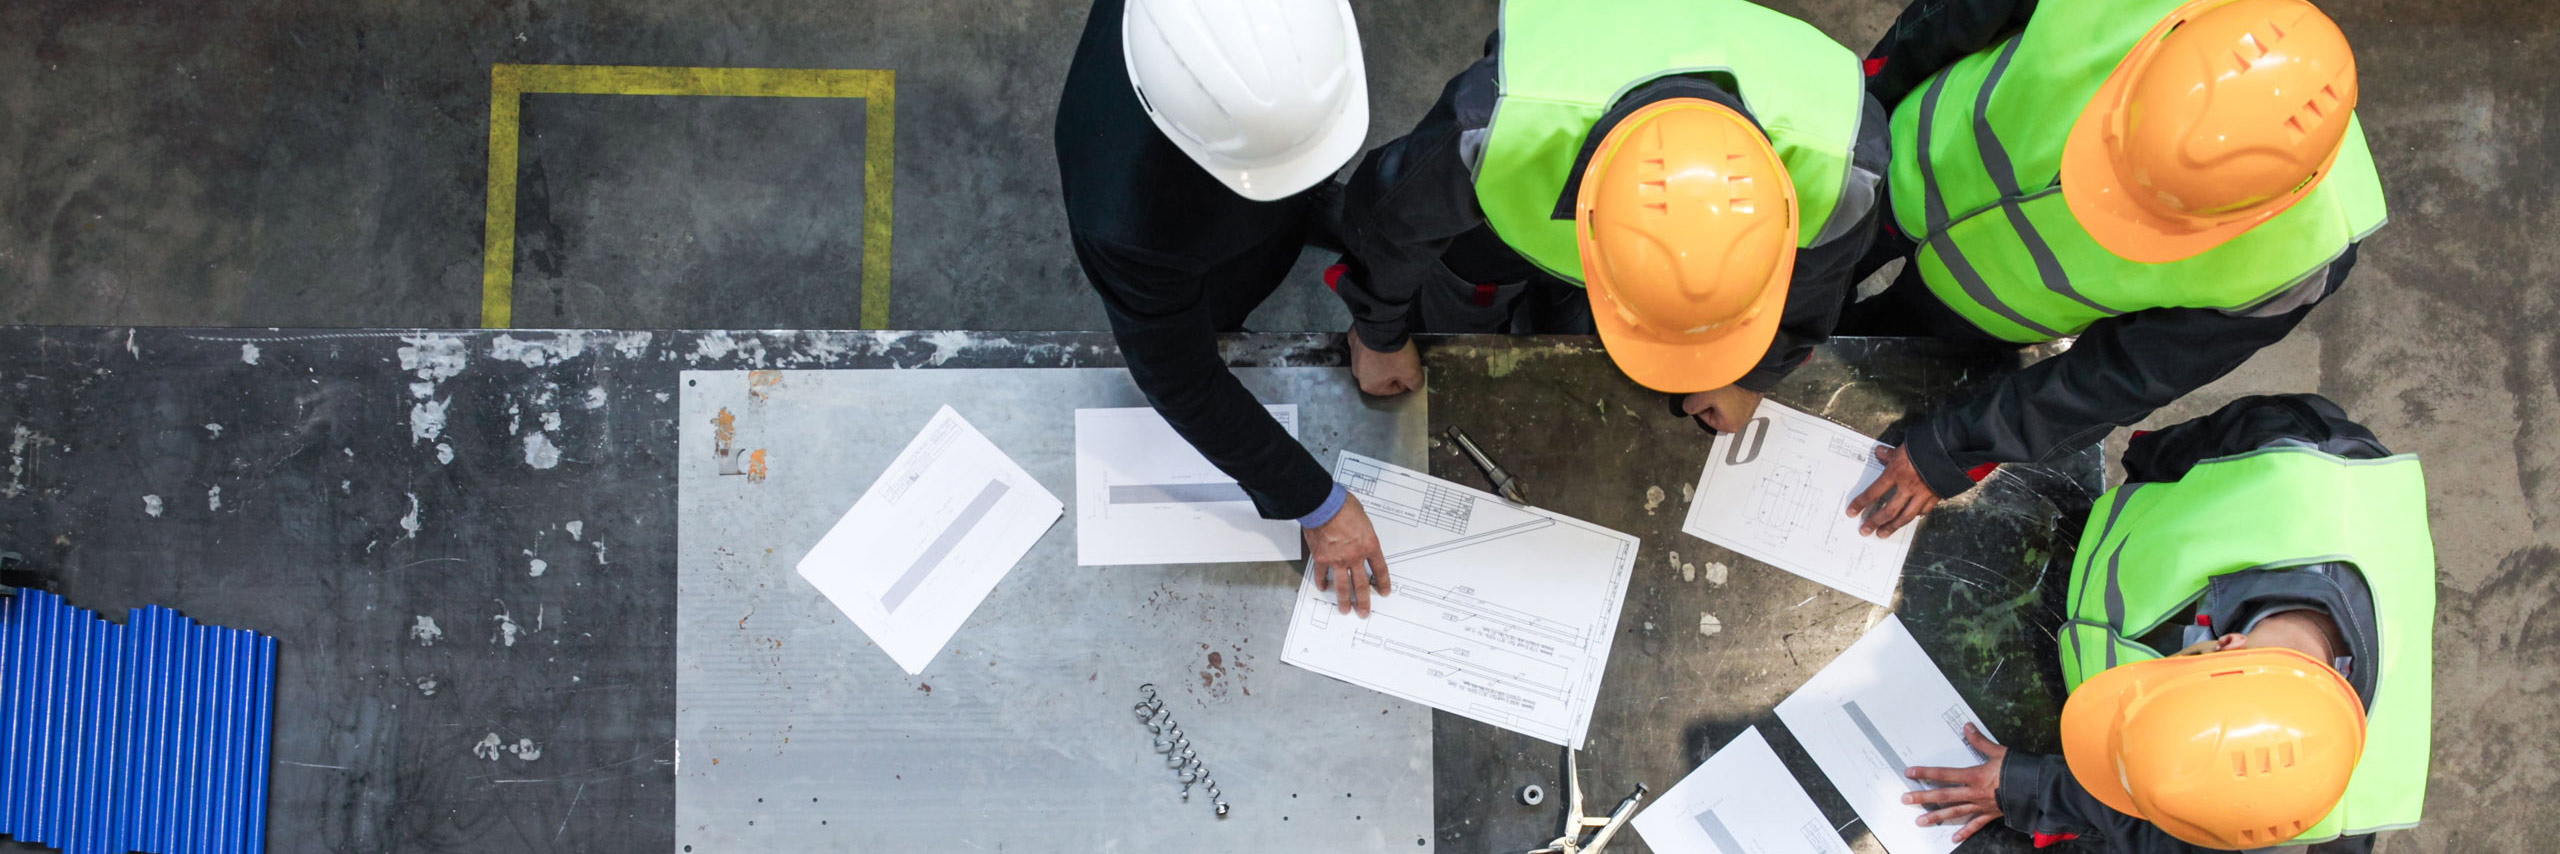 People in hard hats examining printed plans